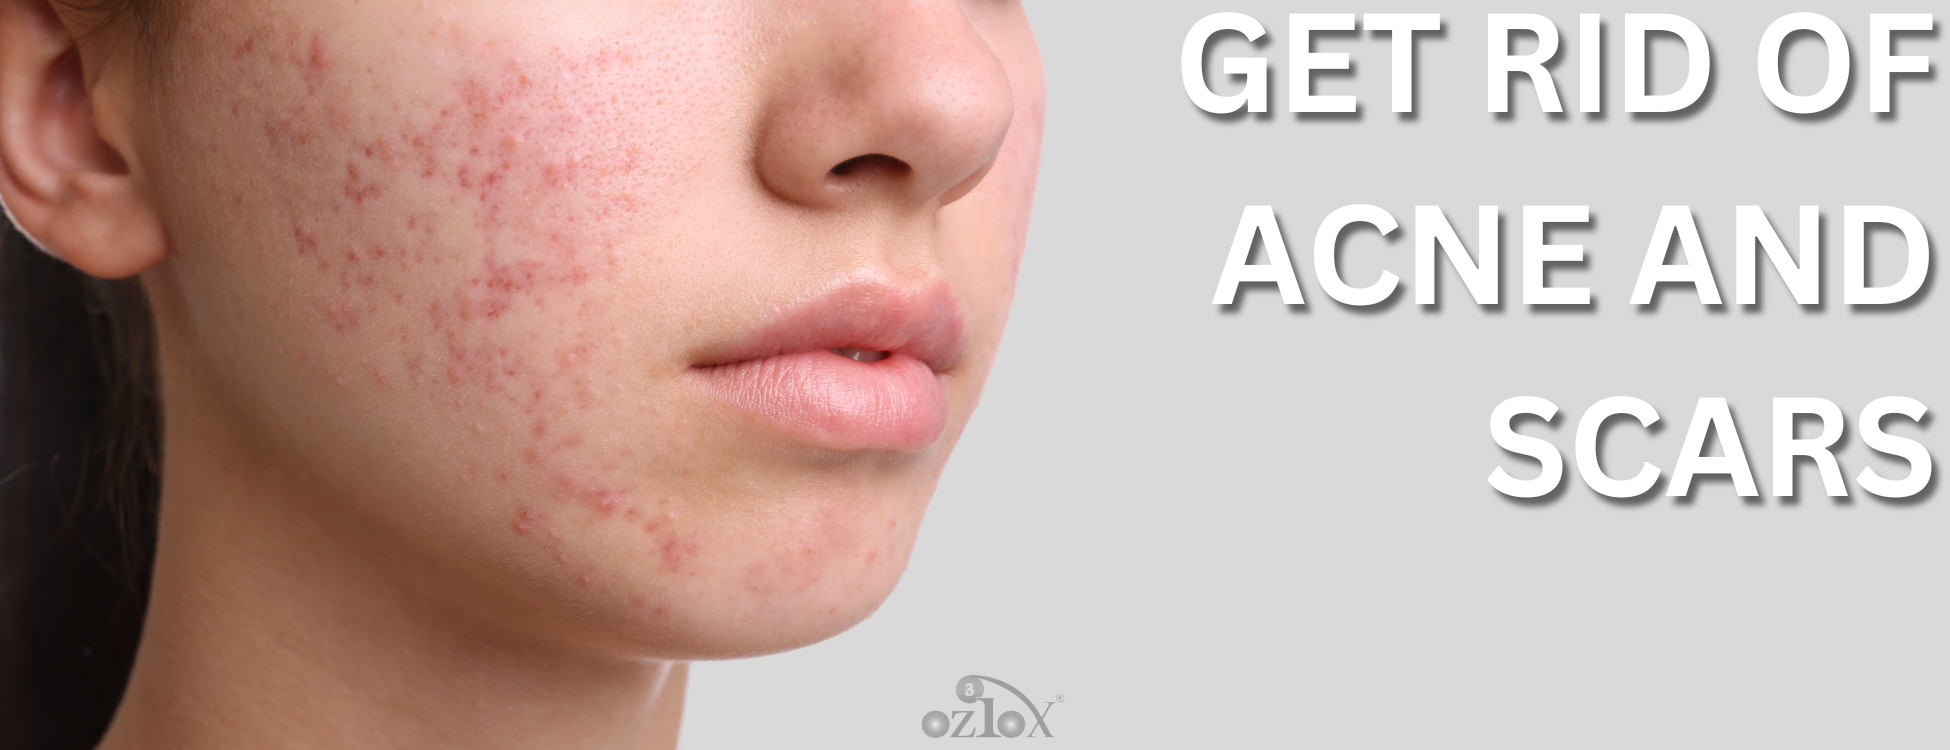 Get rid of acne and scars